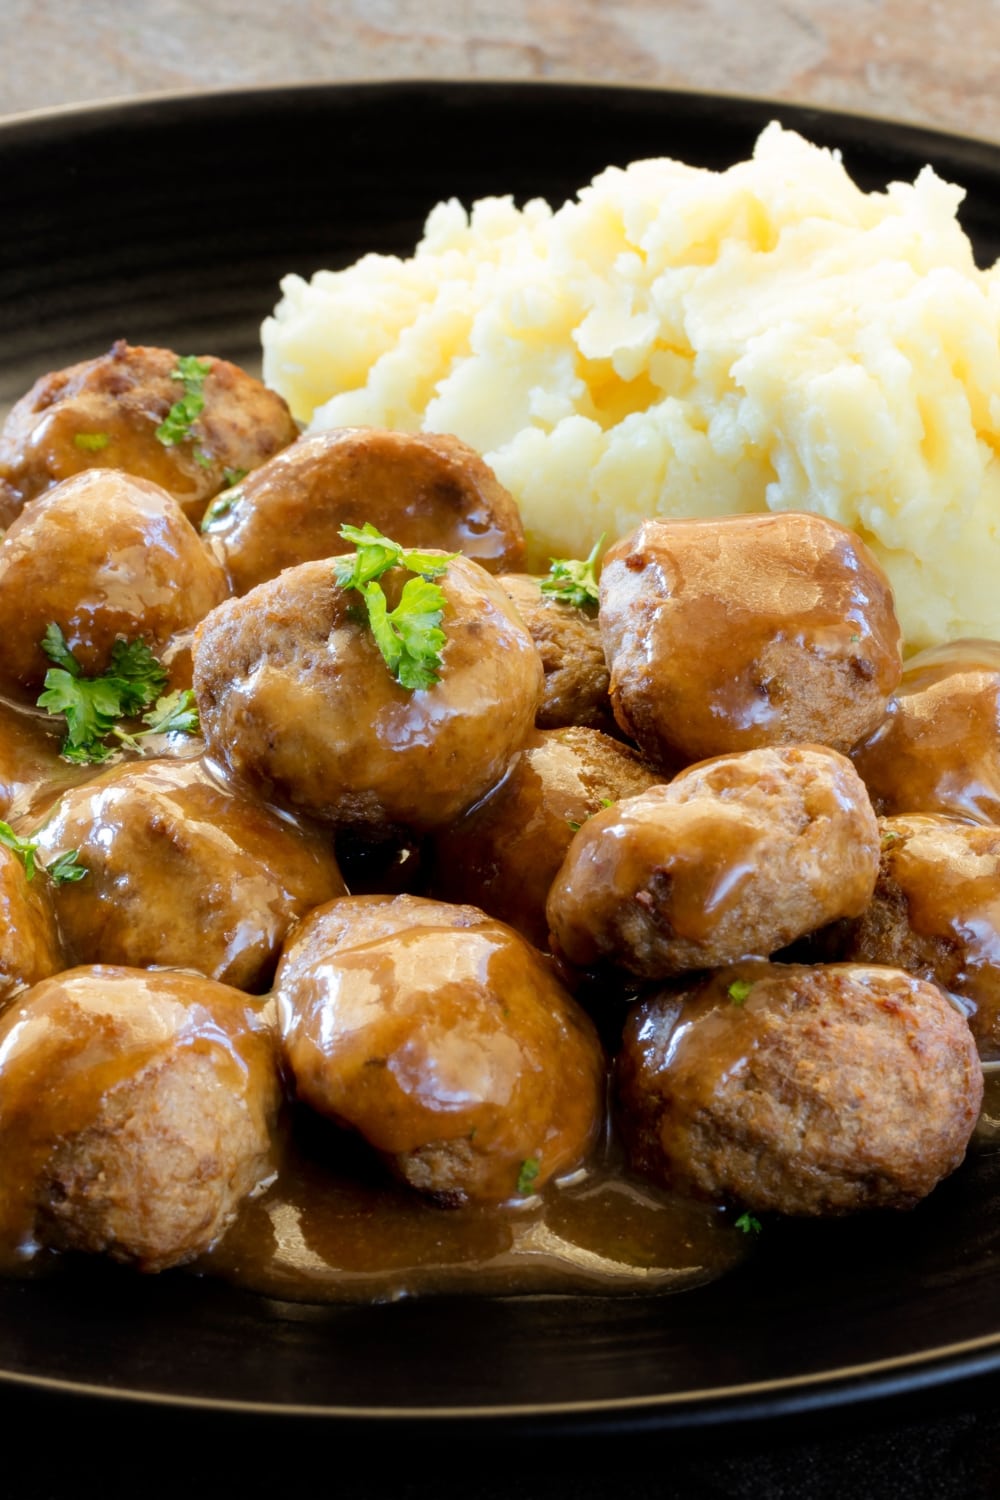 A plate of Swedish meatballs topped with gravy, with mashed potatoes on the side